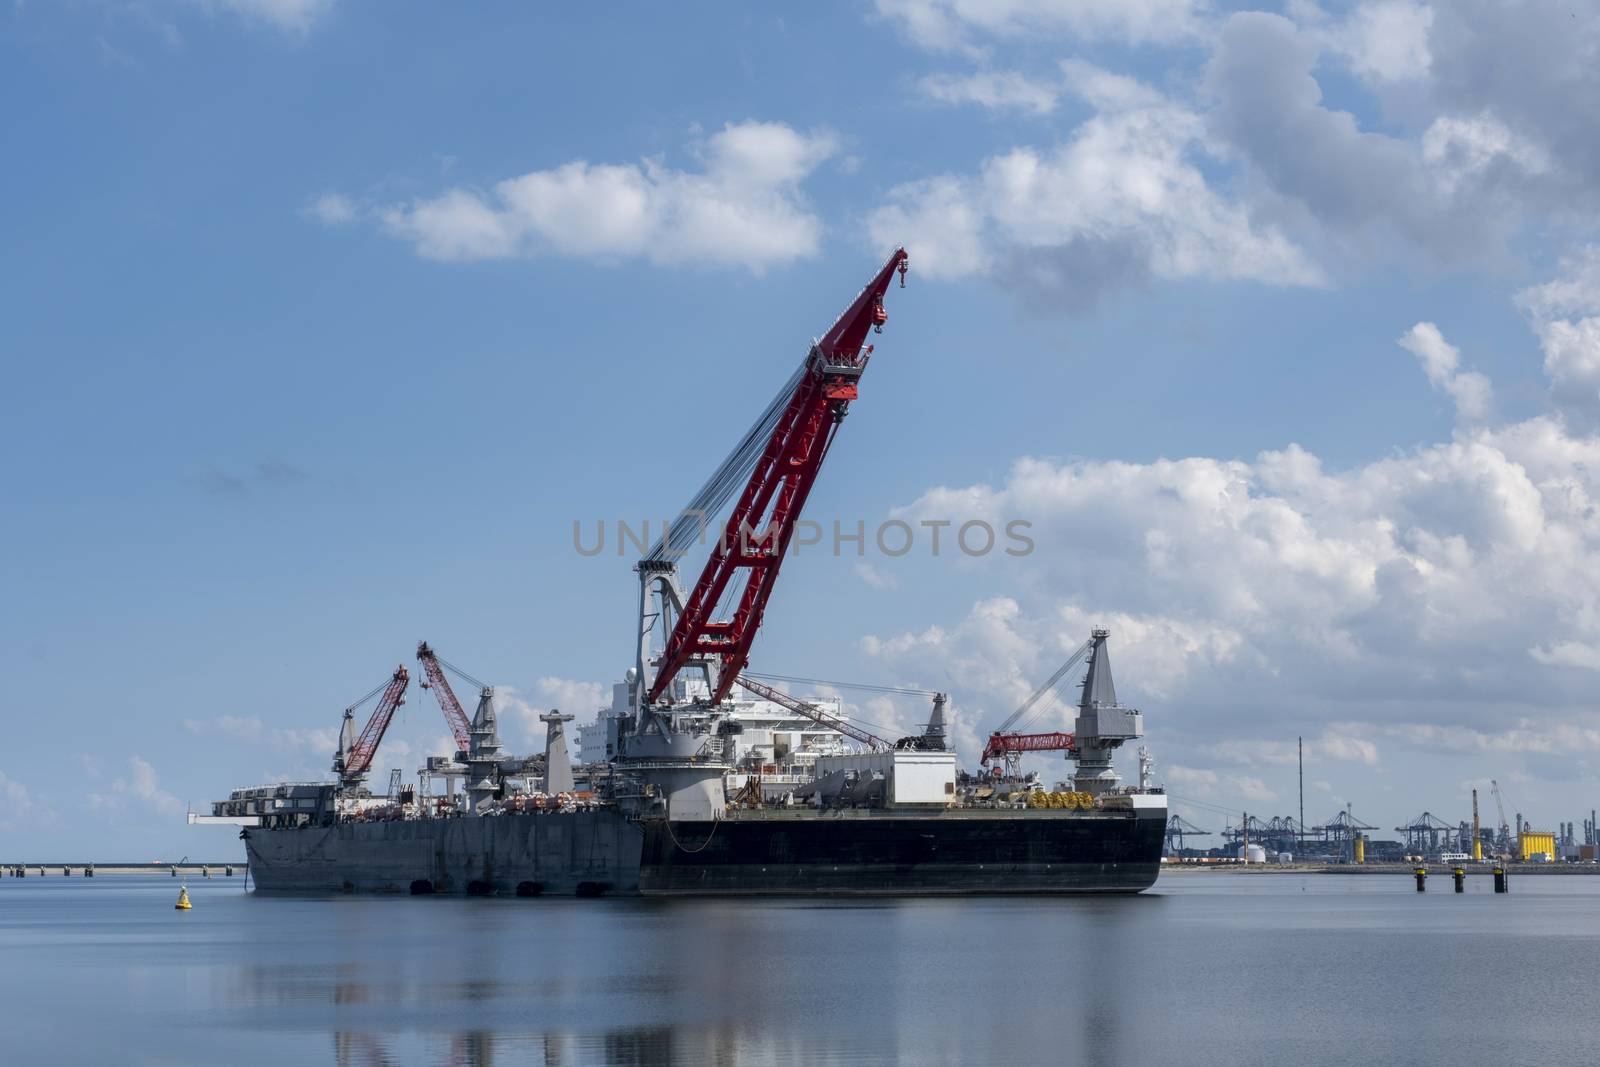 ROTTERDAM, MAASVLAKTE, THE NETHERLANDS Construction vessel moored at the Maasvlakte, Rotterdam in The Netherlands with the new 5000 tonne crane. by Tjeerdkruse